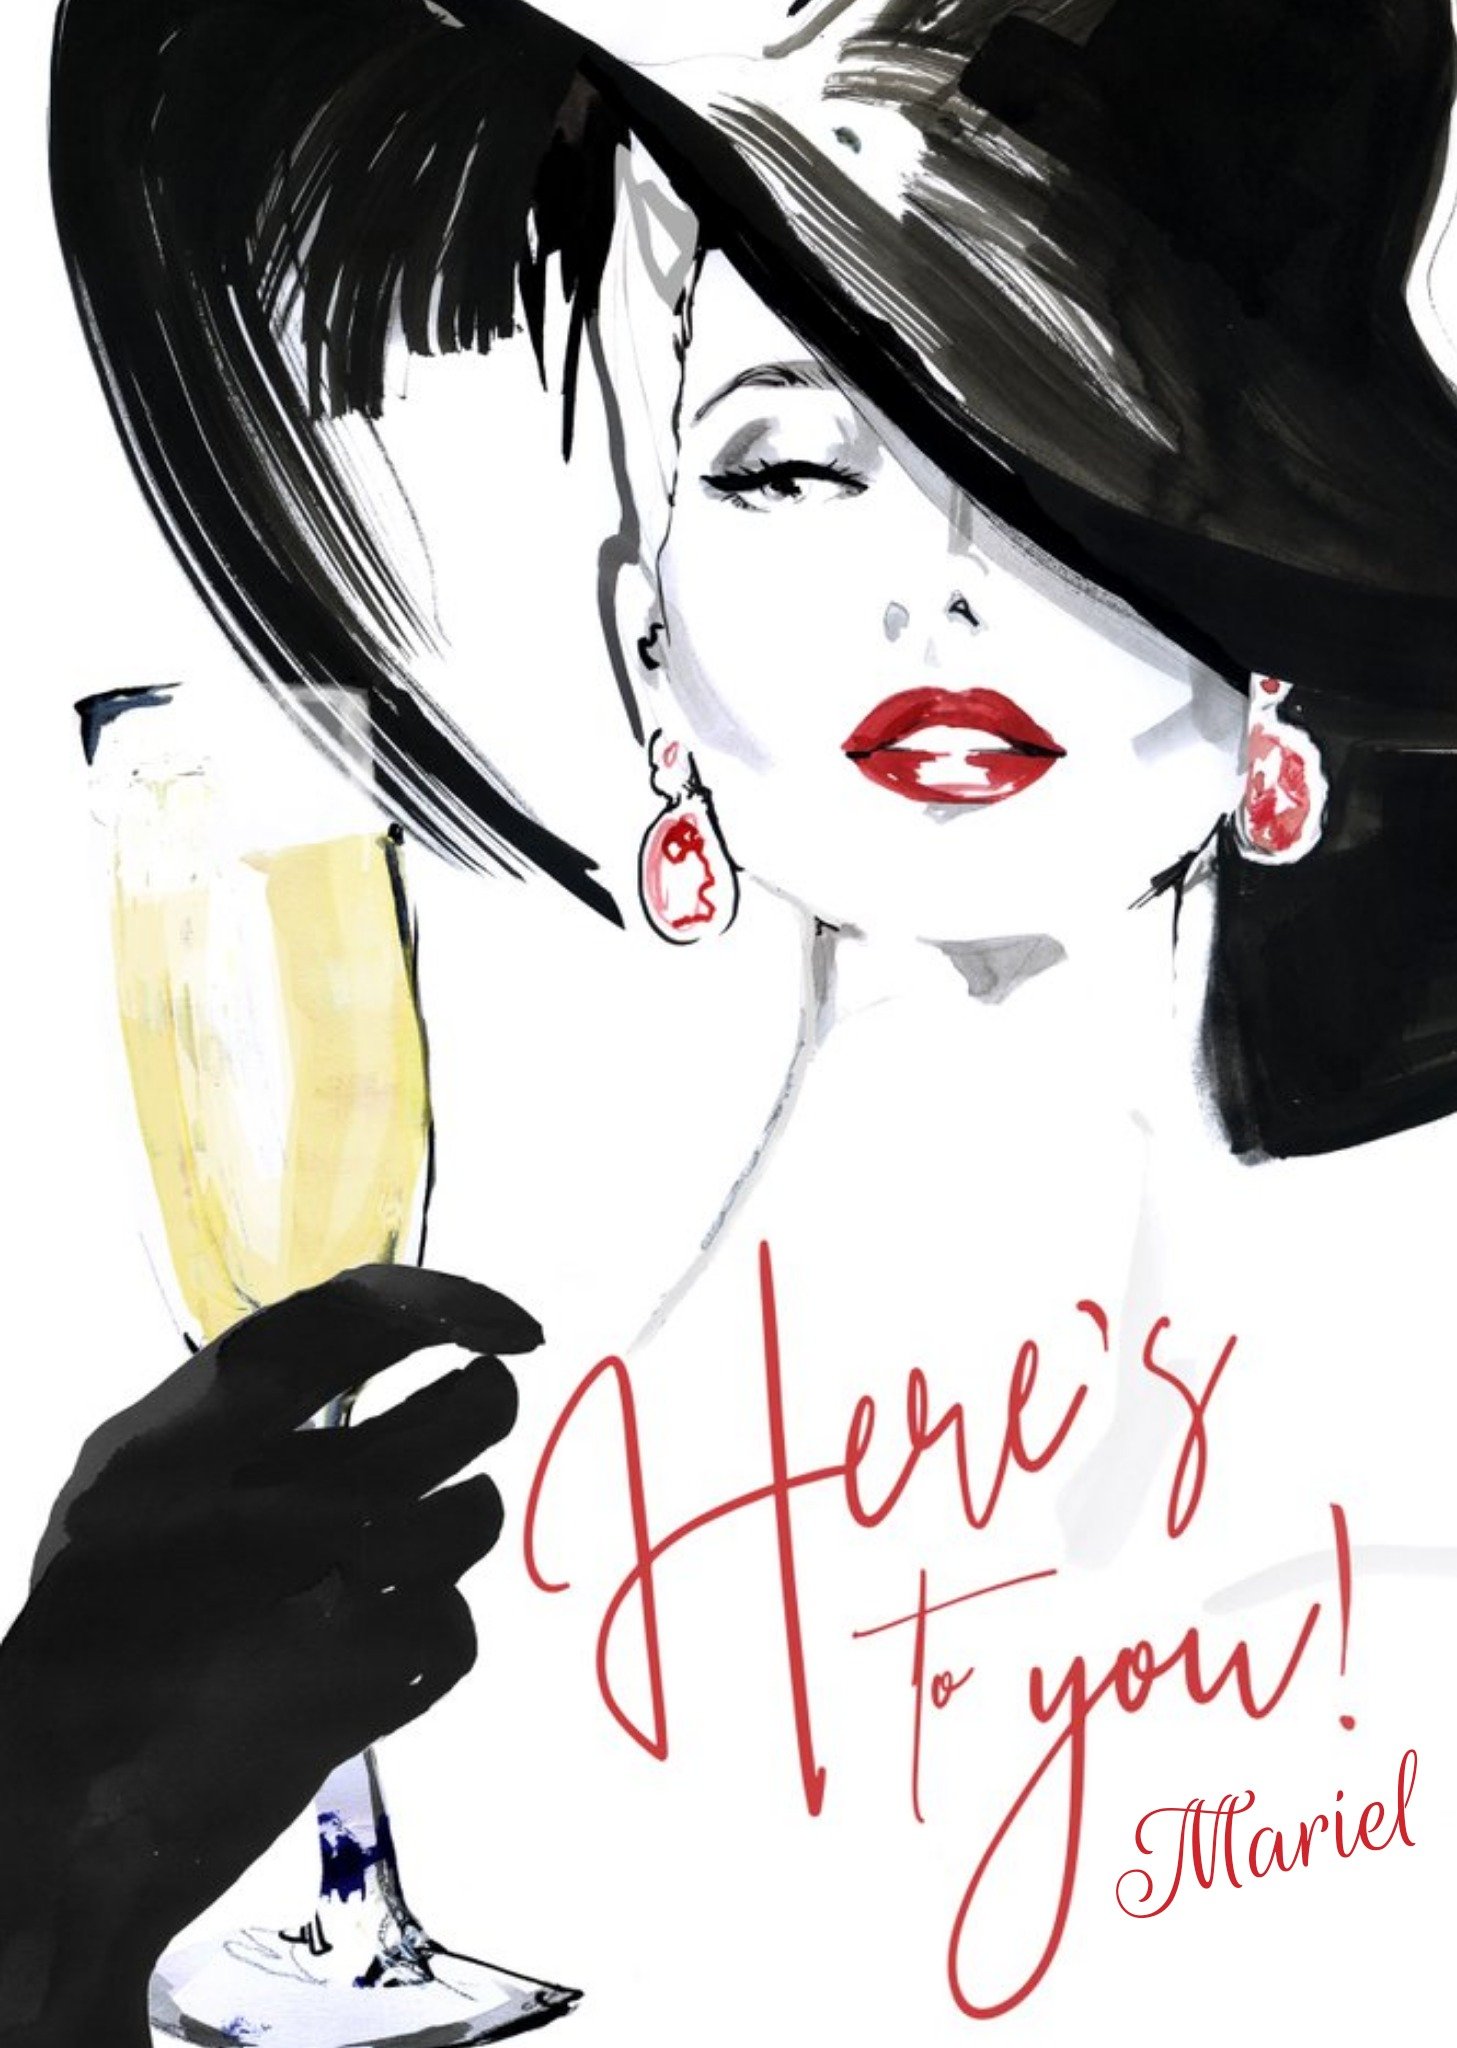 Moonpig Here's To You - Classy Birthday Card - Champagne Ecard